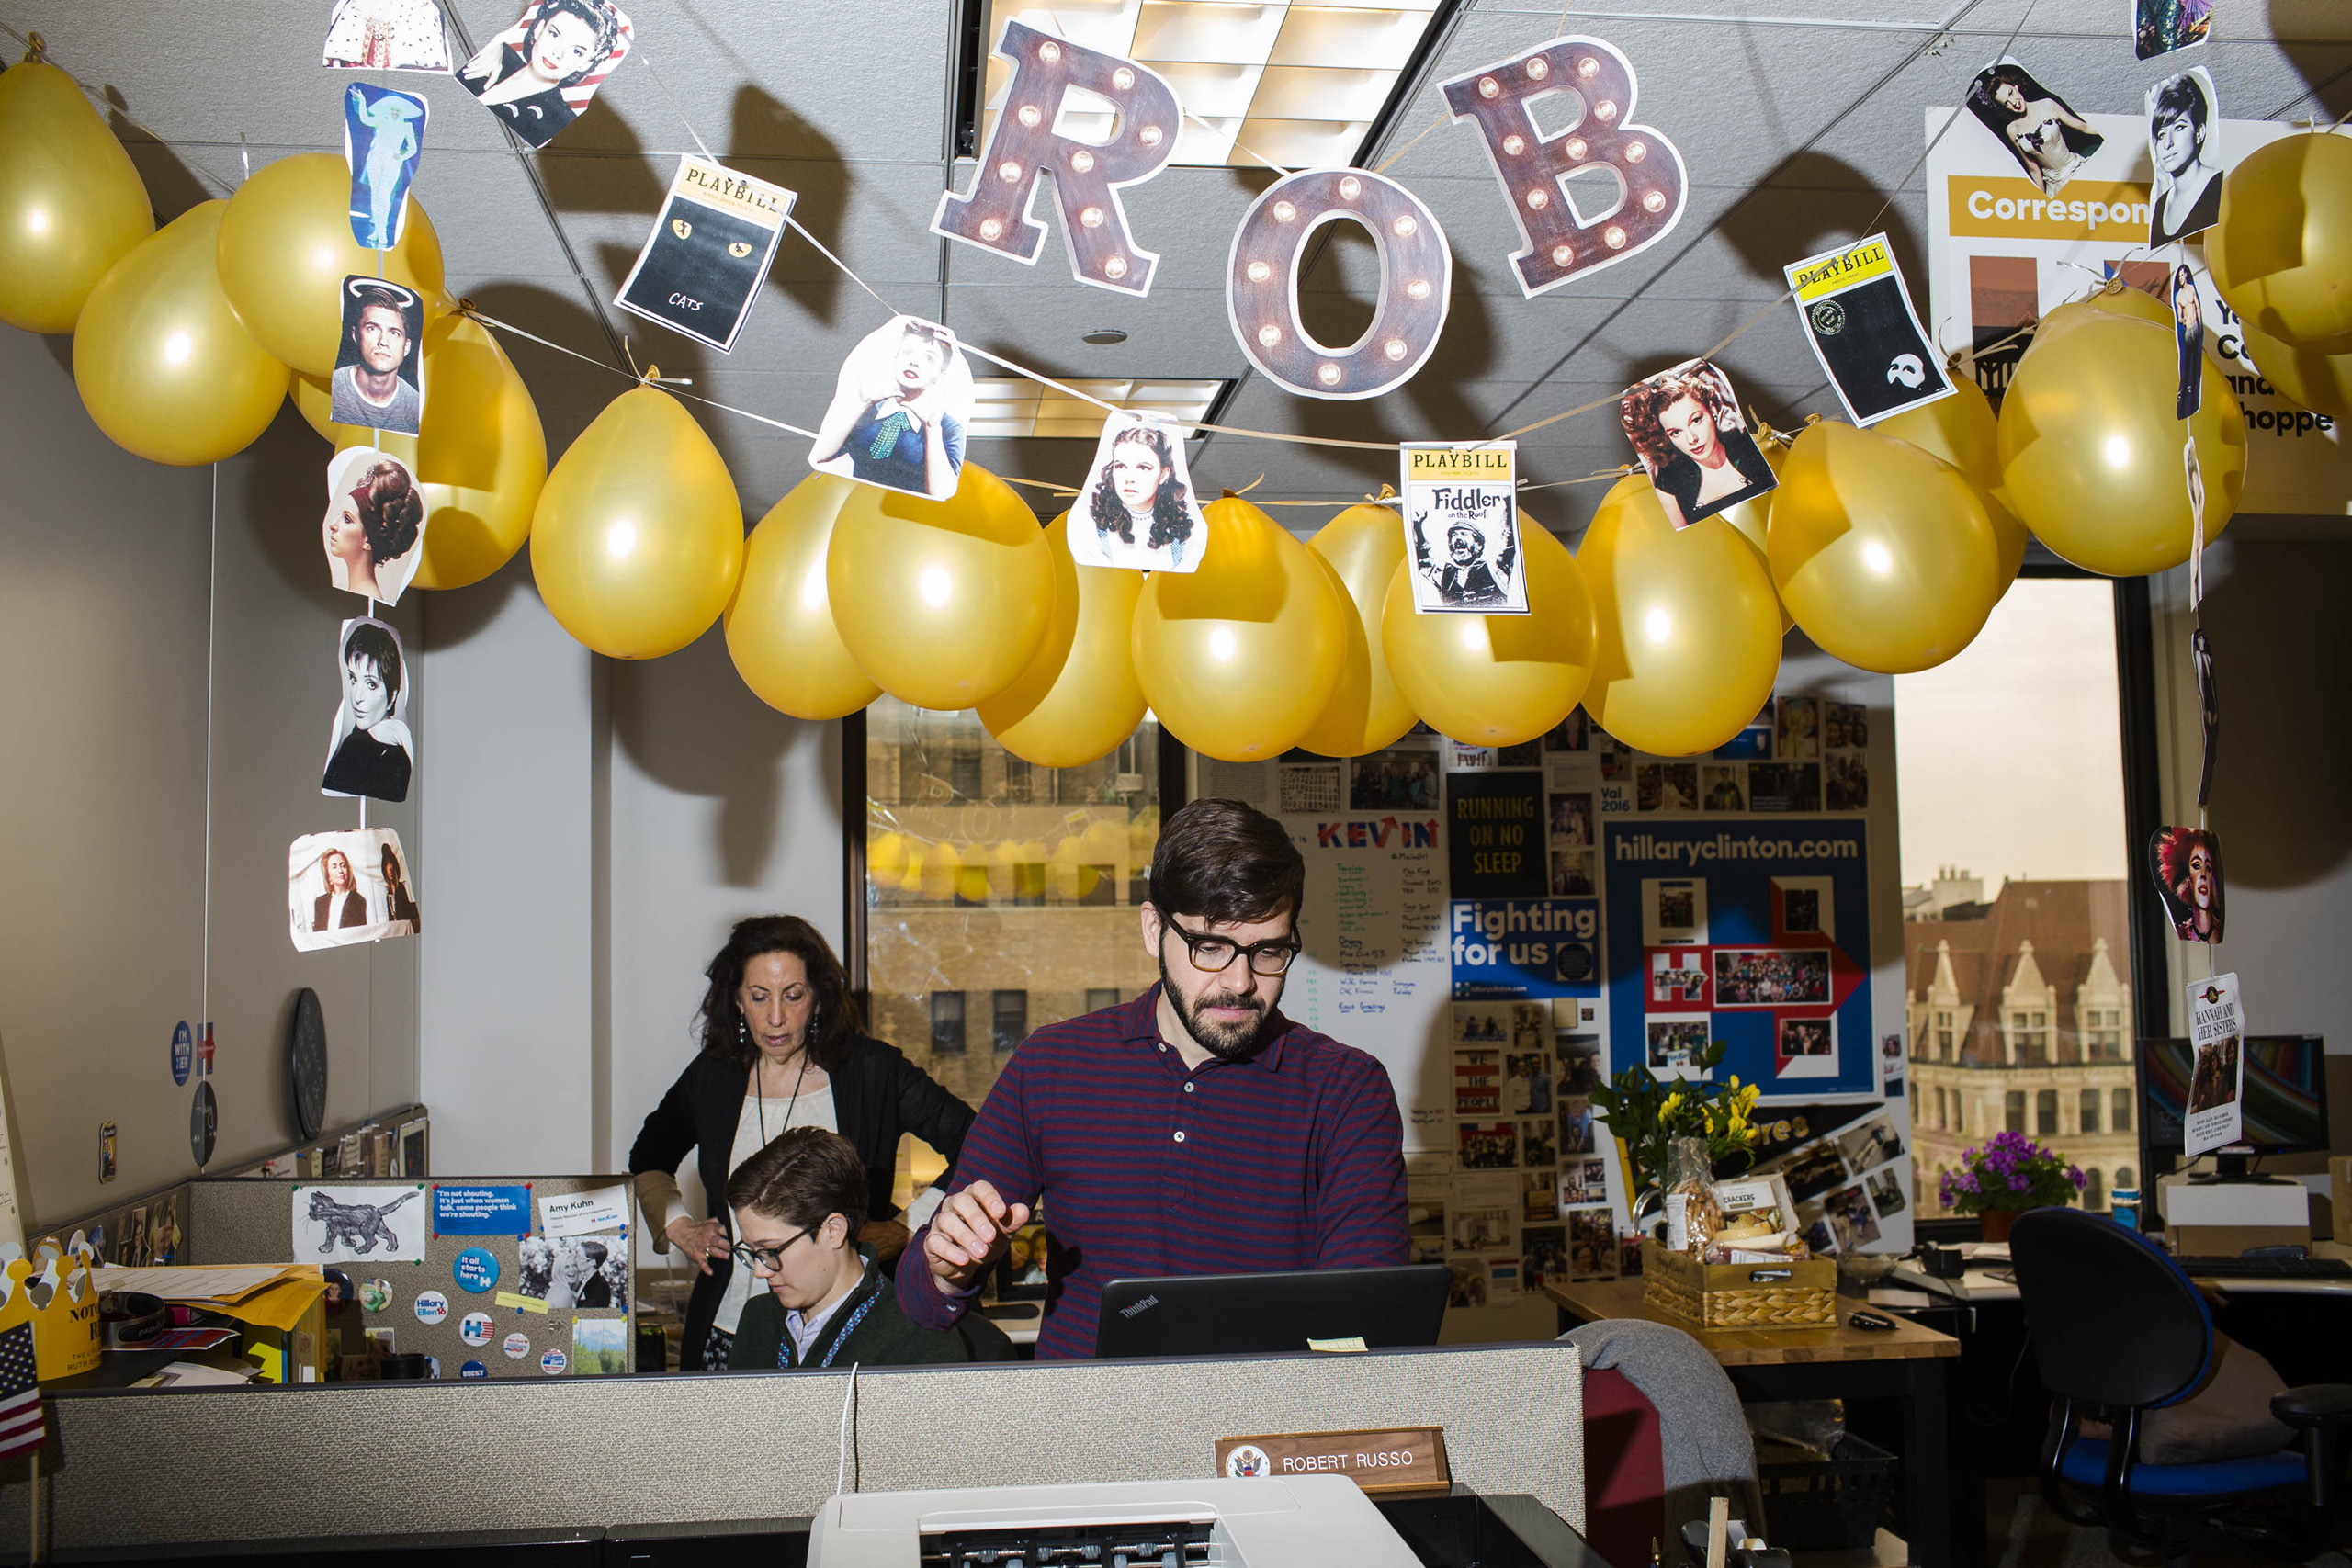 Staff at work inside the campaign headquarters of Hillary Clinton on May 24, 2016, in Brooklyn, NY.